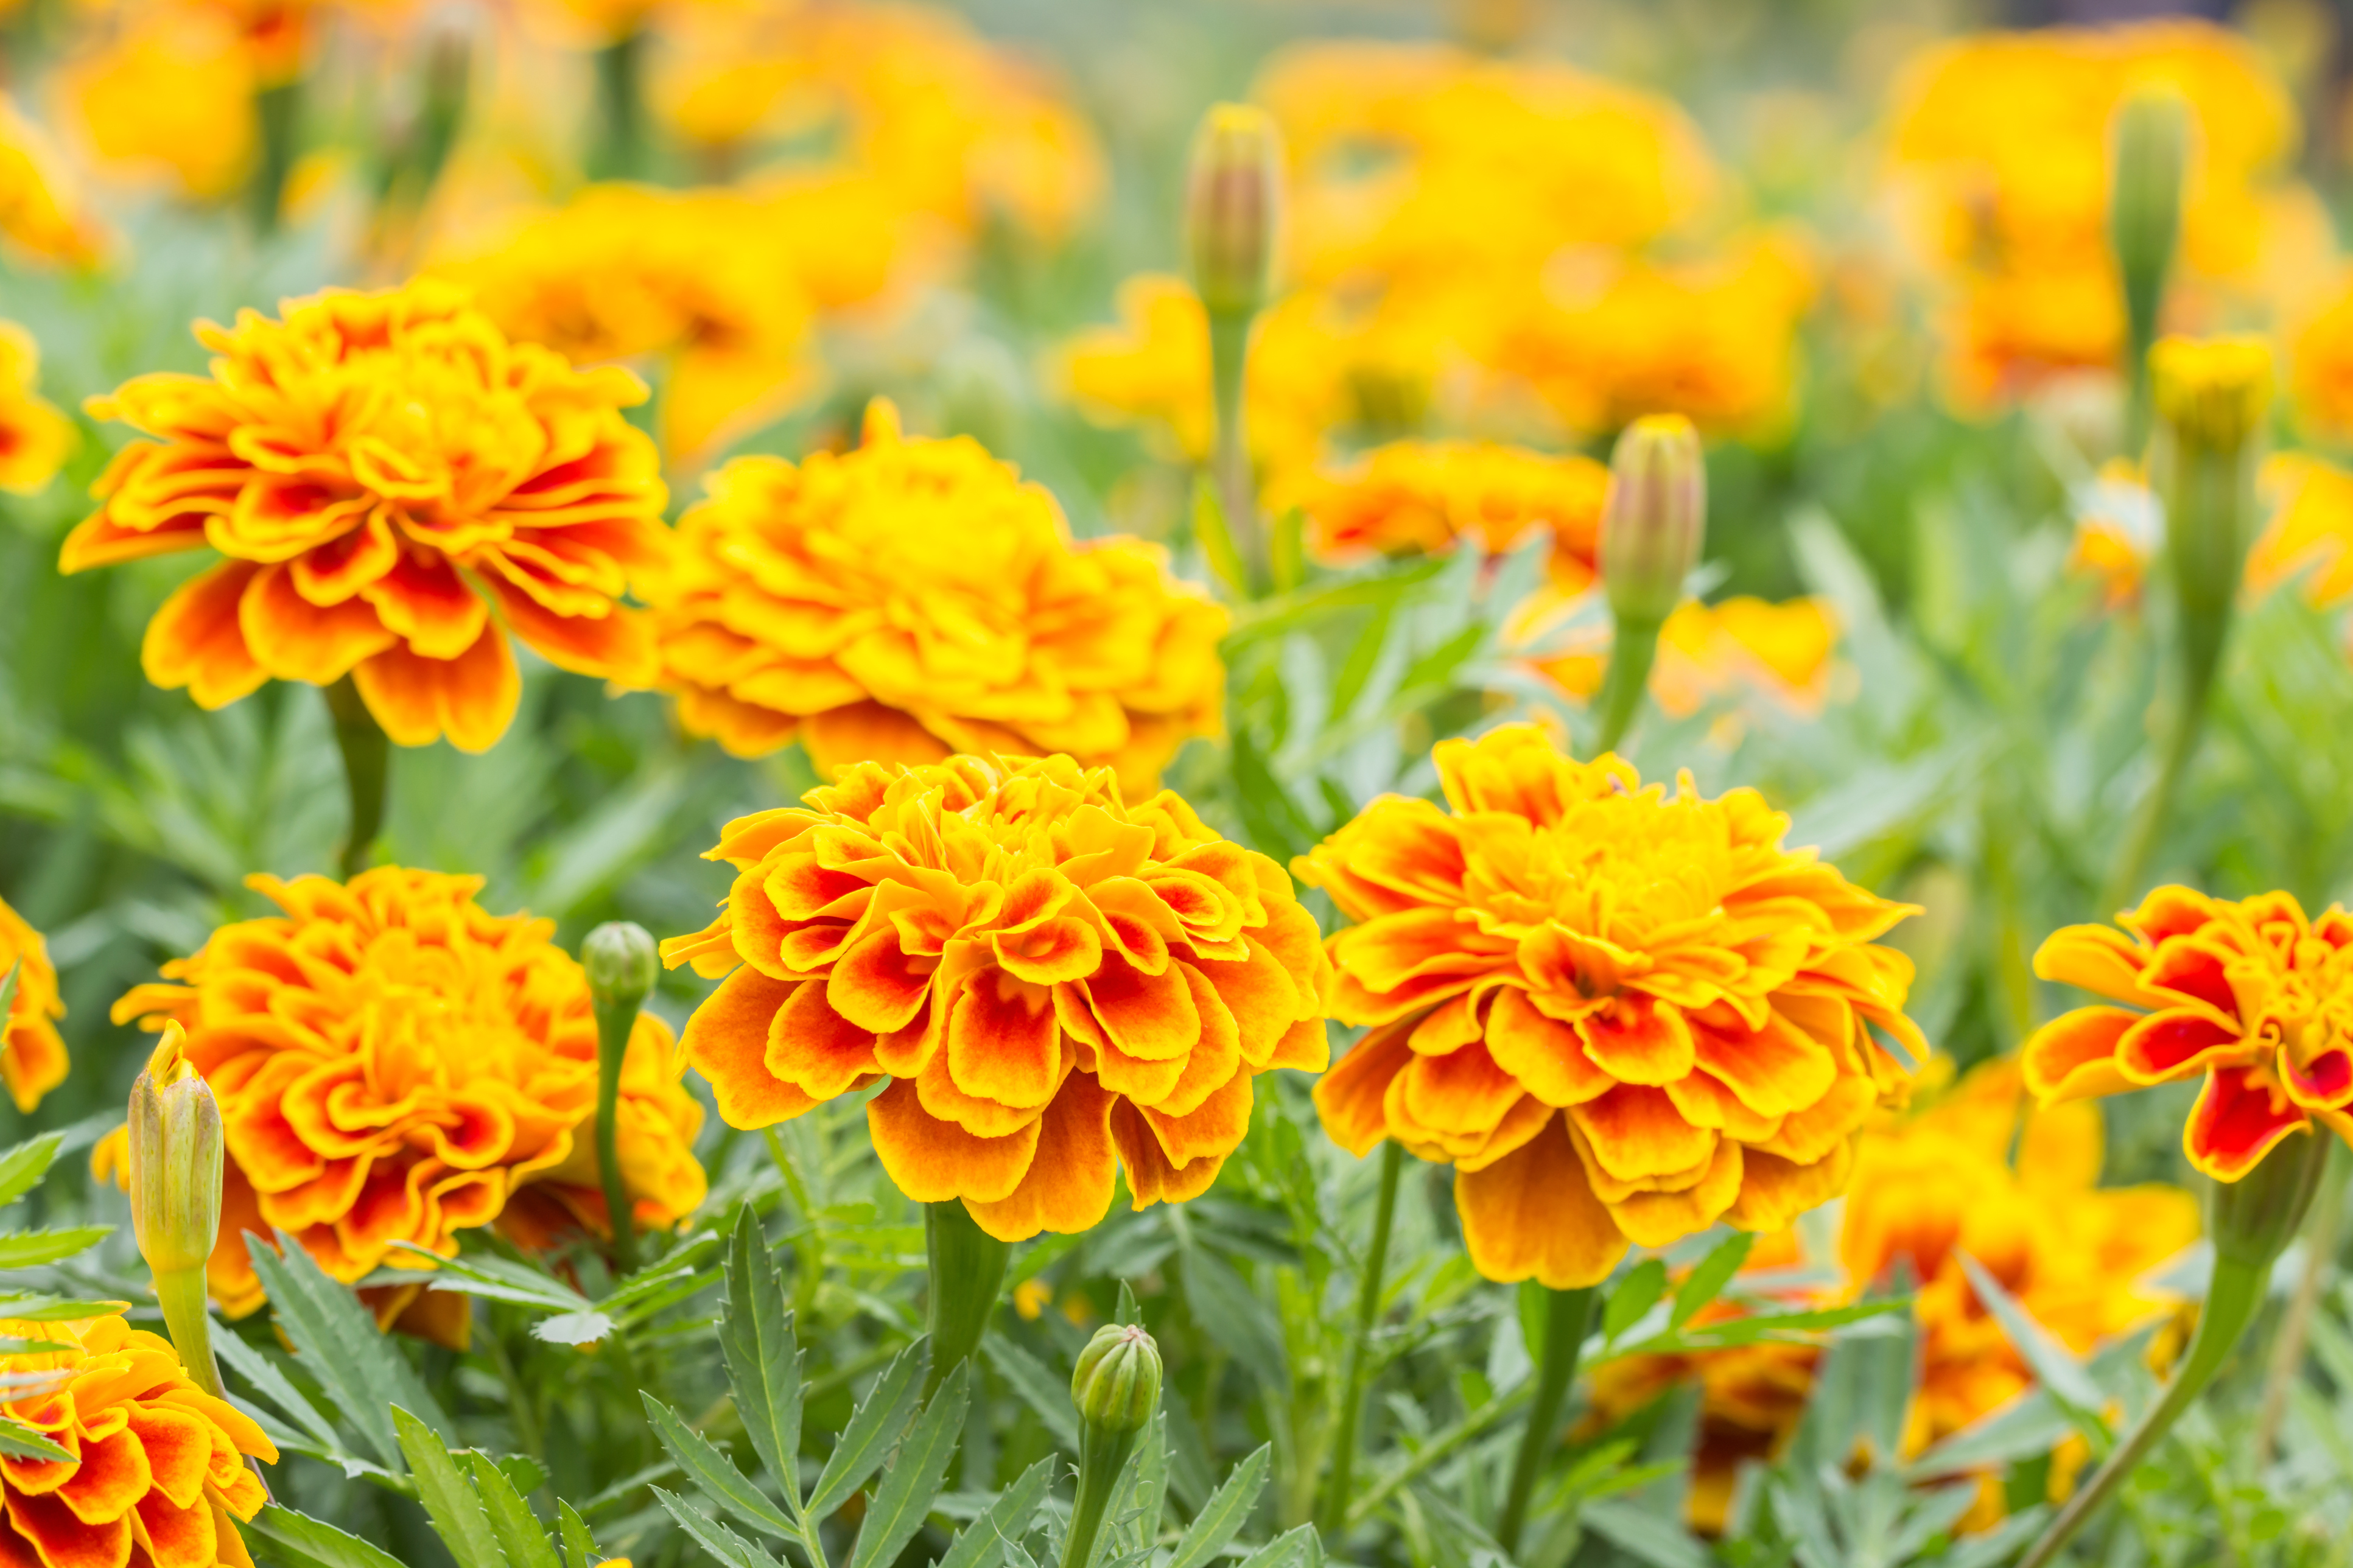 The smell of marigolds repels whitefly. (Thinkstock/PA)